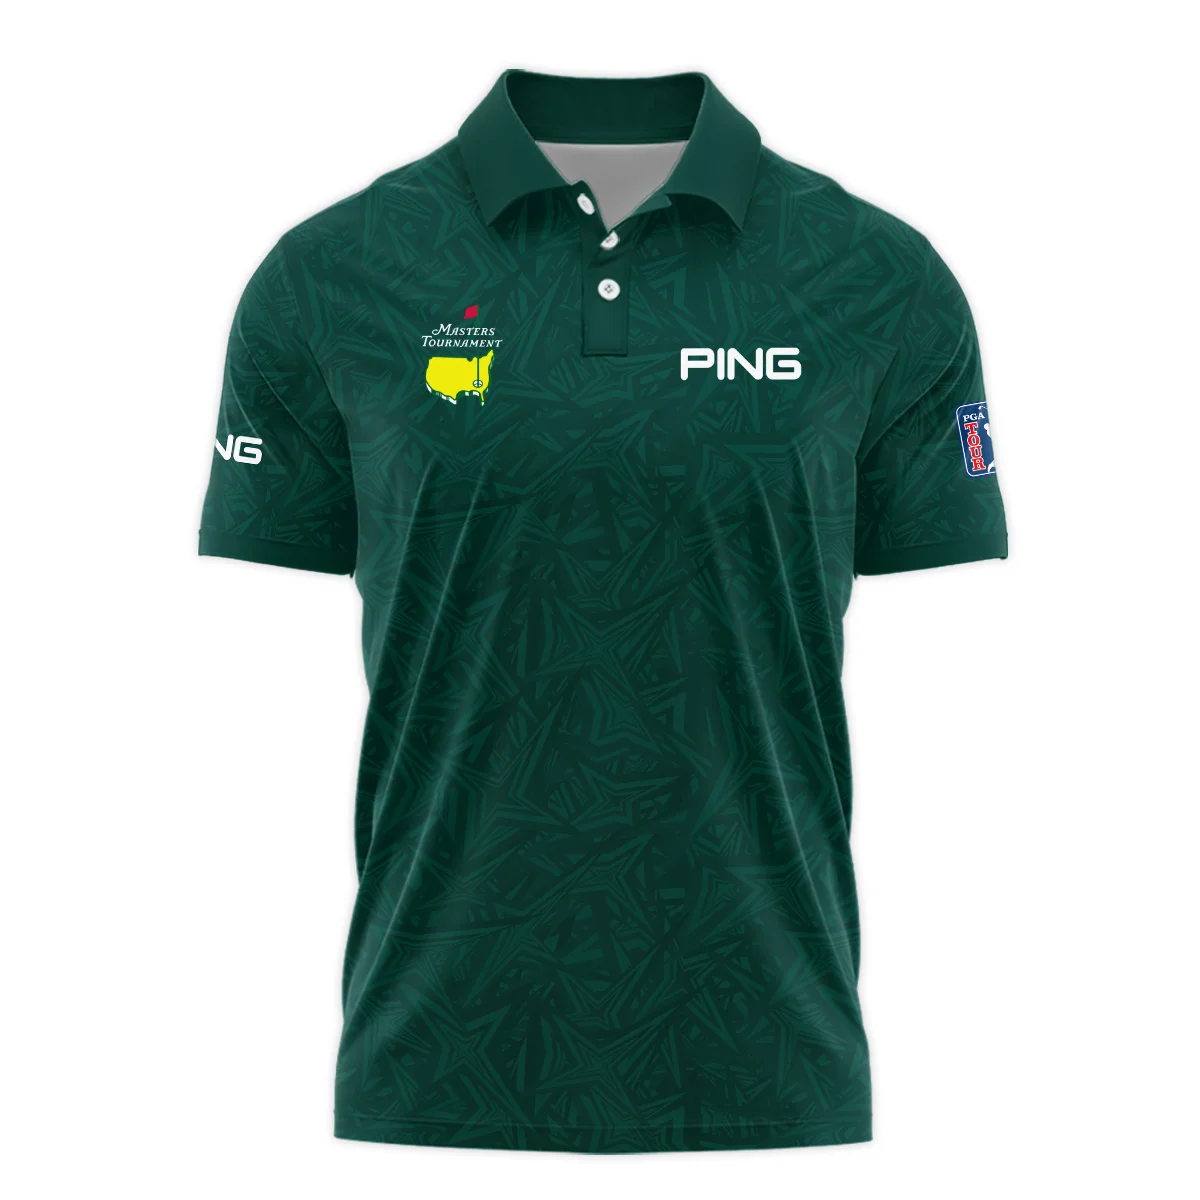 Stars Dark Green Abstract Sport Masters Tournament Ping Polo Shirt Style Classic Polo Shirt For Men